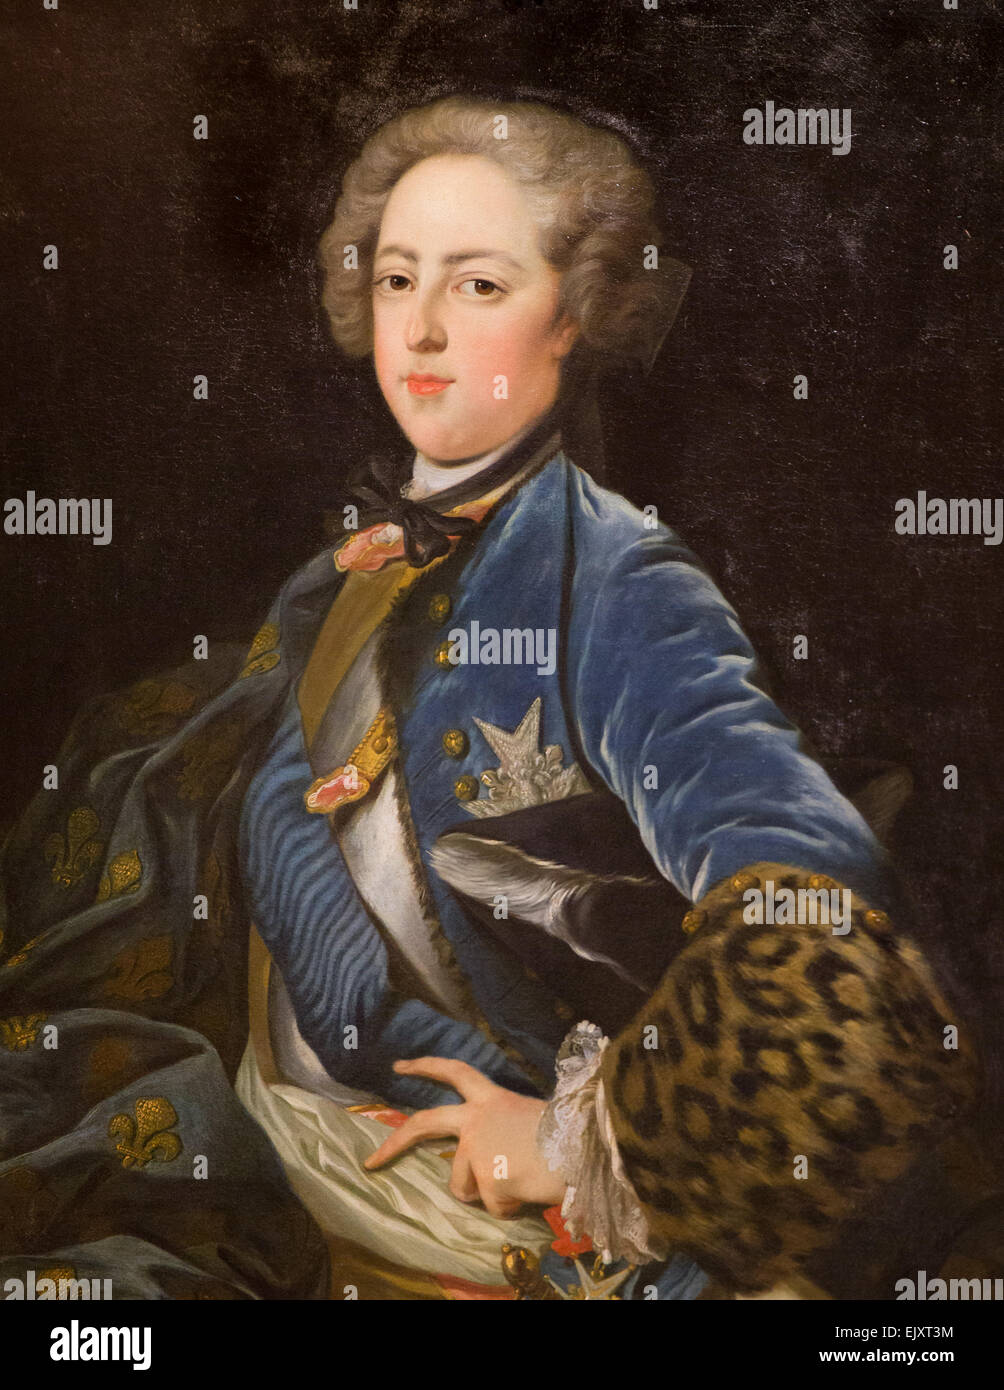 ActiveMuseum_0005734.jpg / Louis XV, King of France. Commanded by the direction of the royal buildings 05/12/2013  -   / 18th century Collection / Active Museum Stock Photo